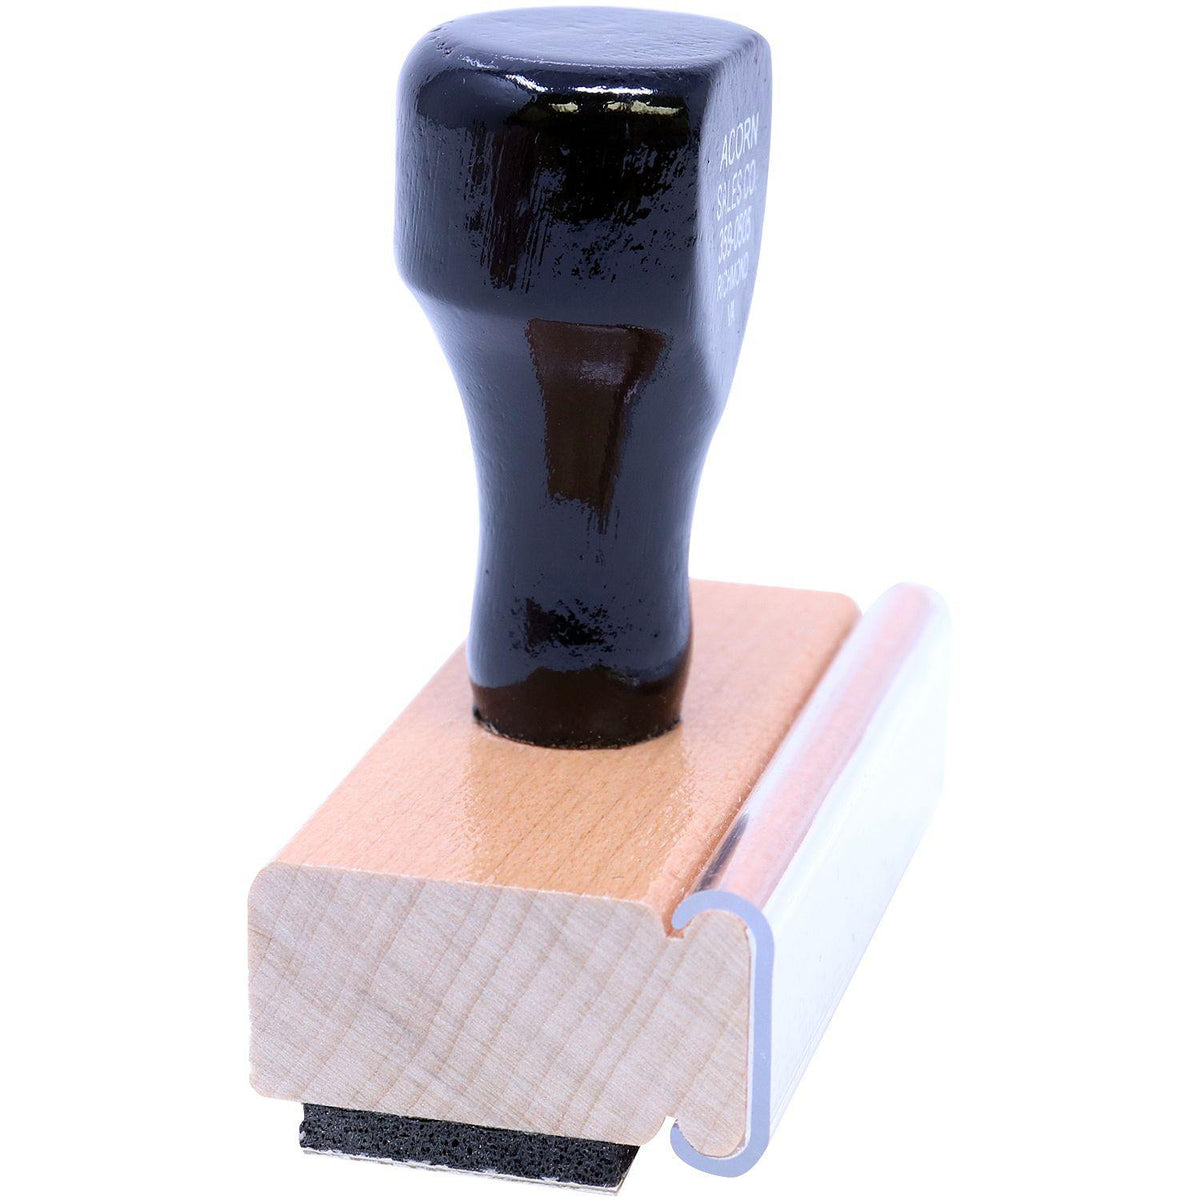 Side View of Excellent Work Rubber Stamp at an Angle